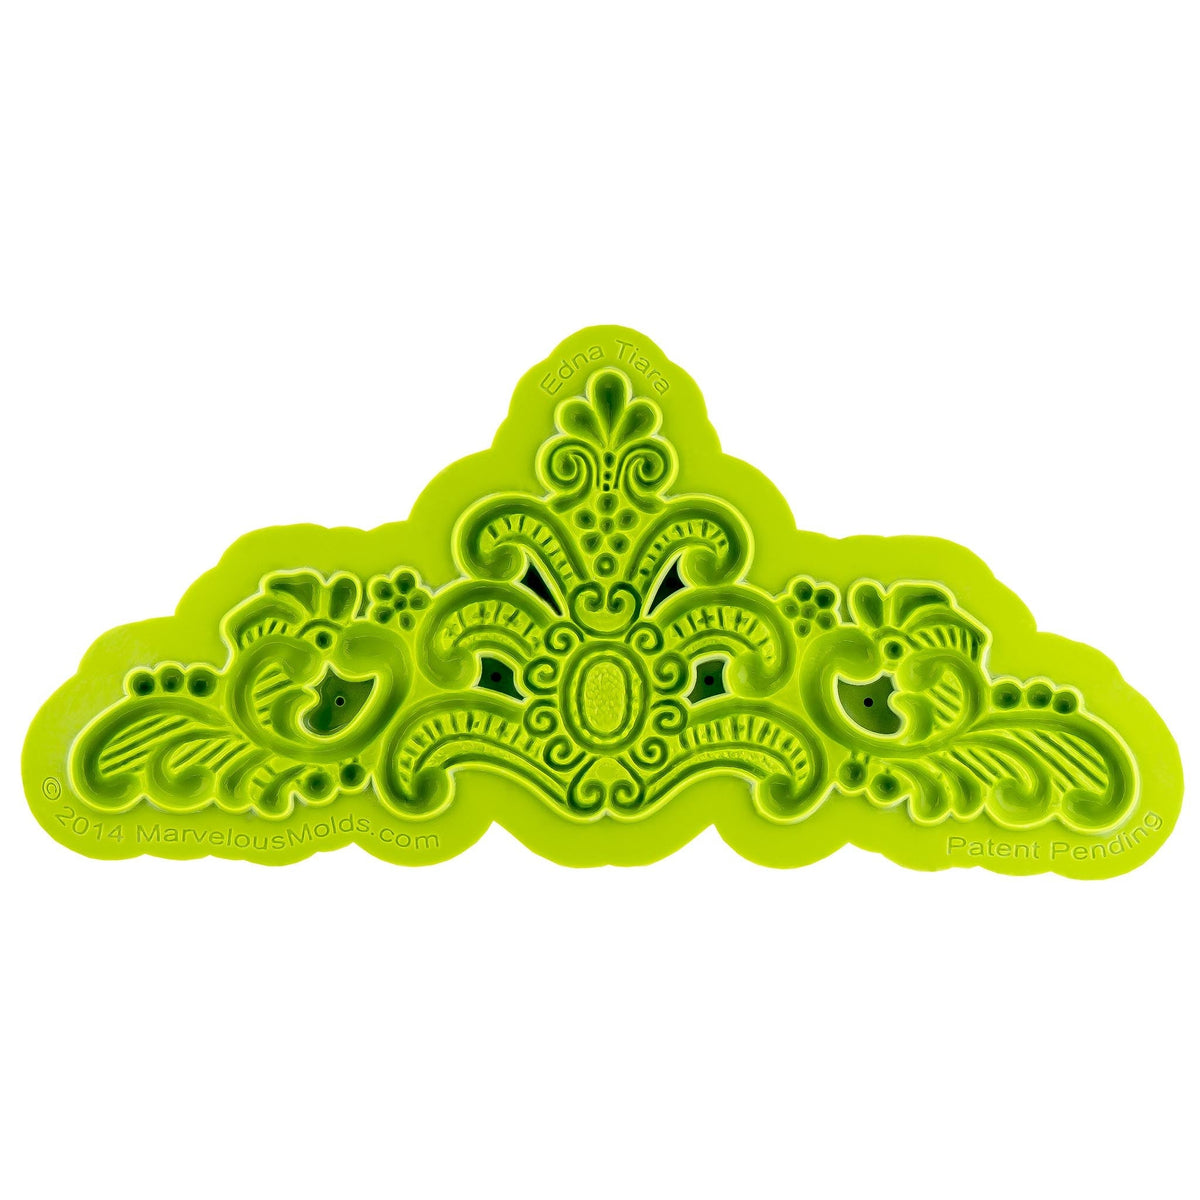 Marvelous Molds Damask Pattern Silicone Onlay